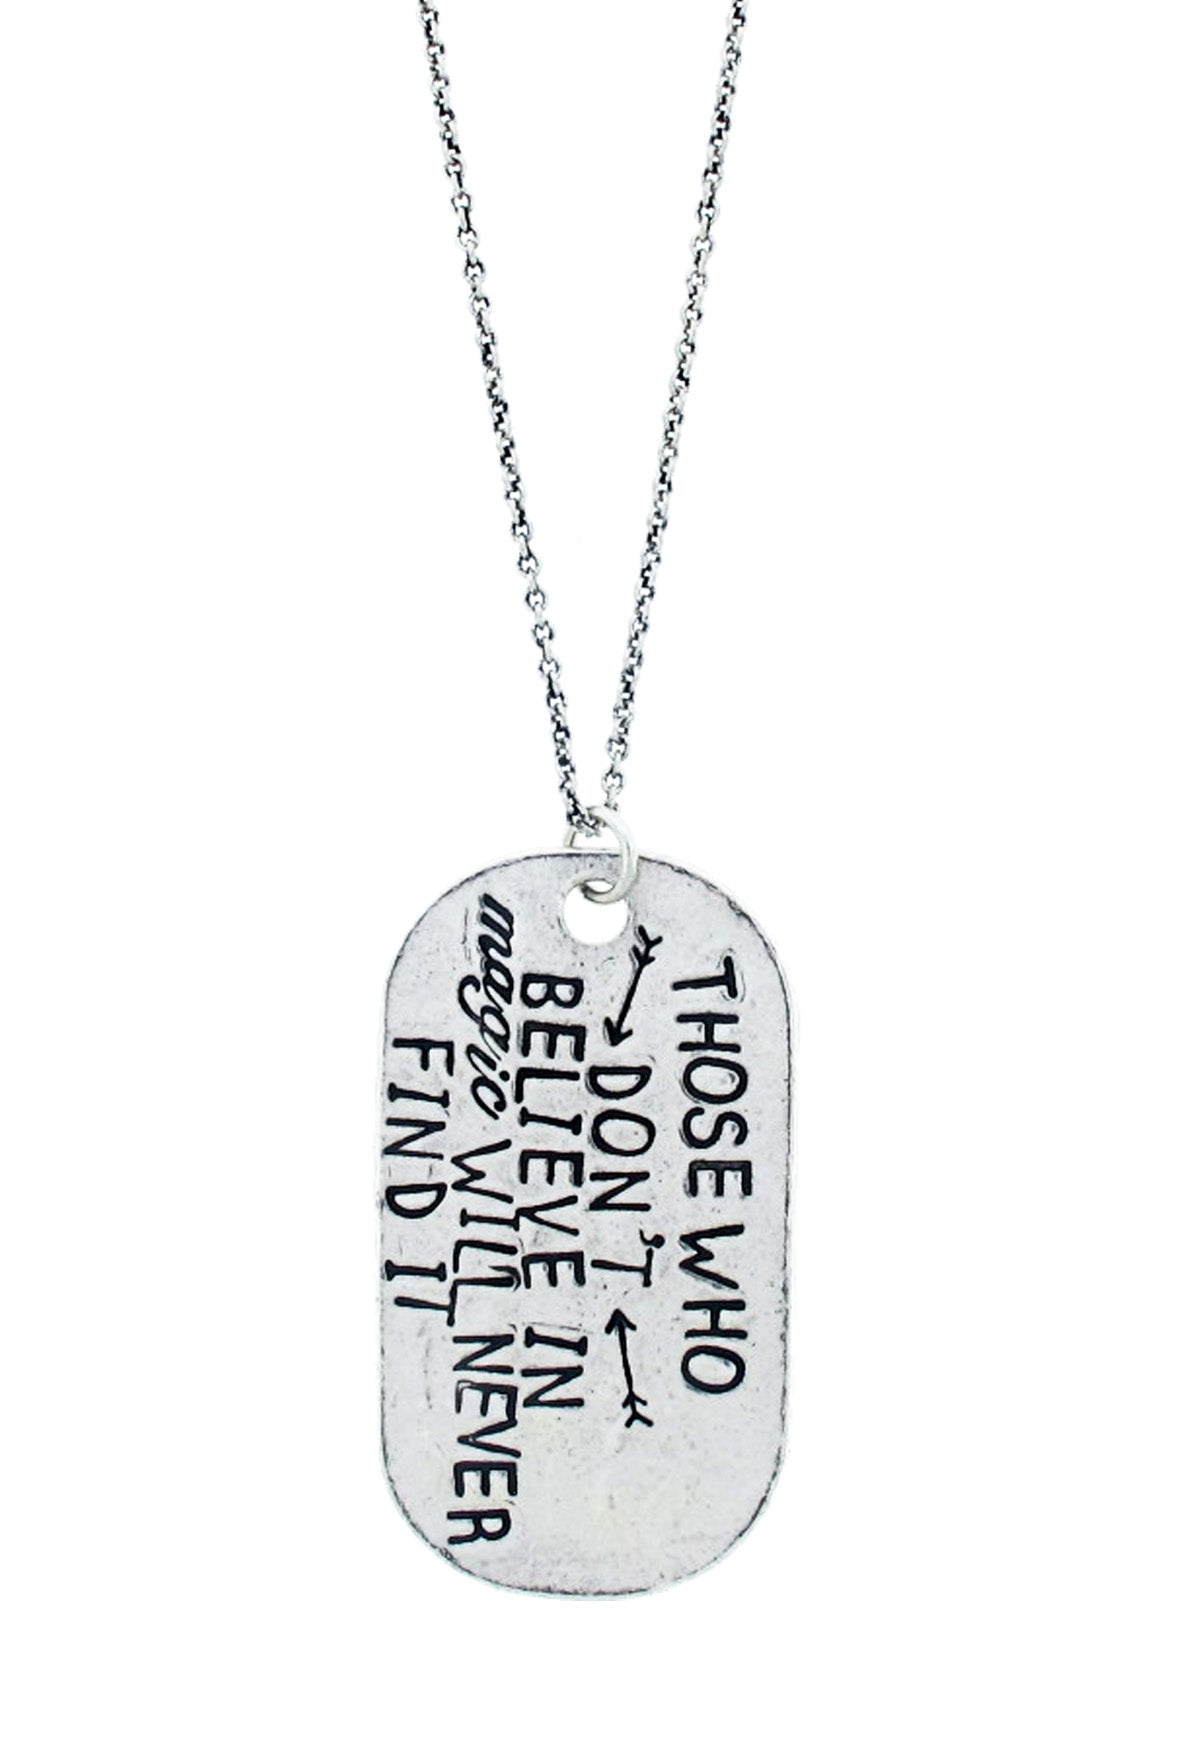 Believe in the Unbelievable Dog Tag Hand Stamped Necklace